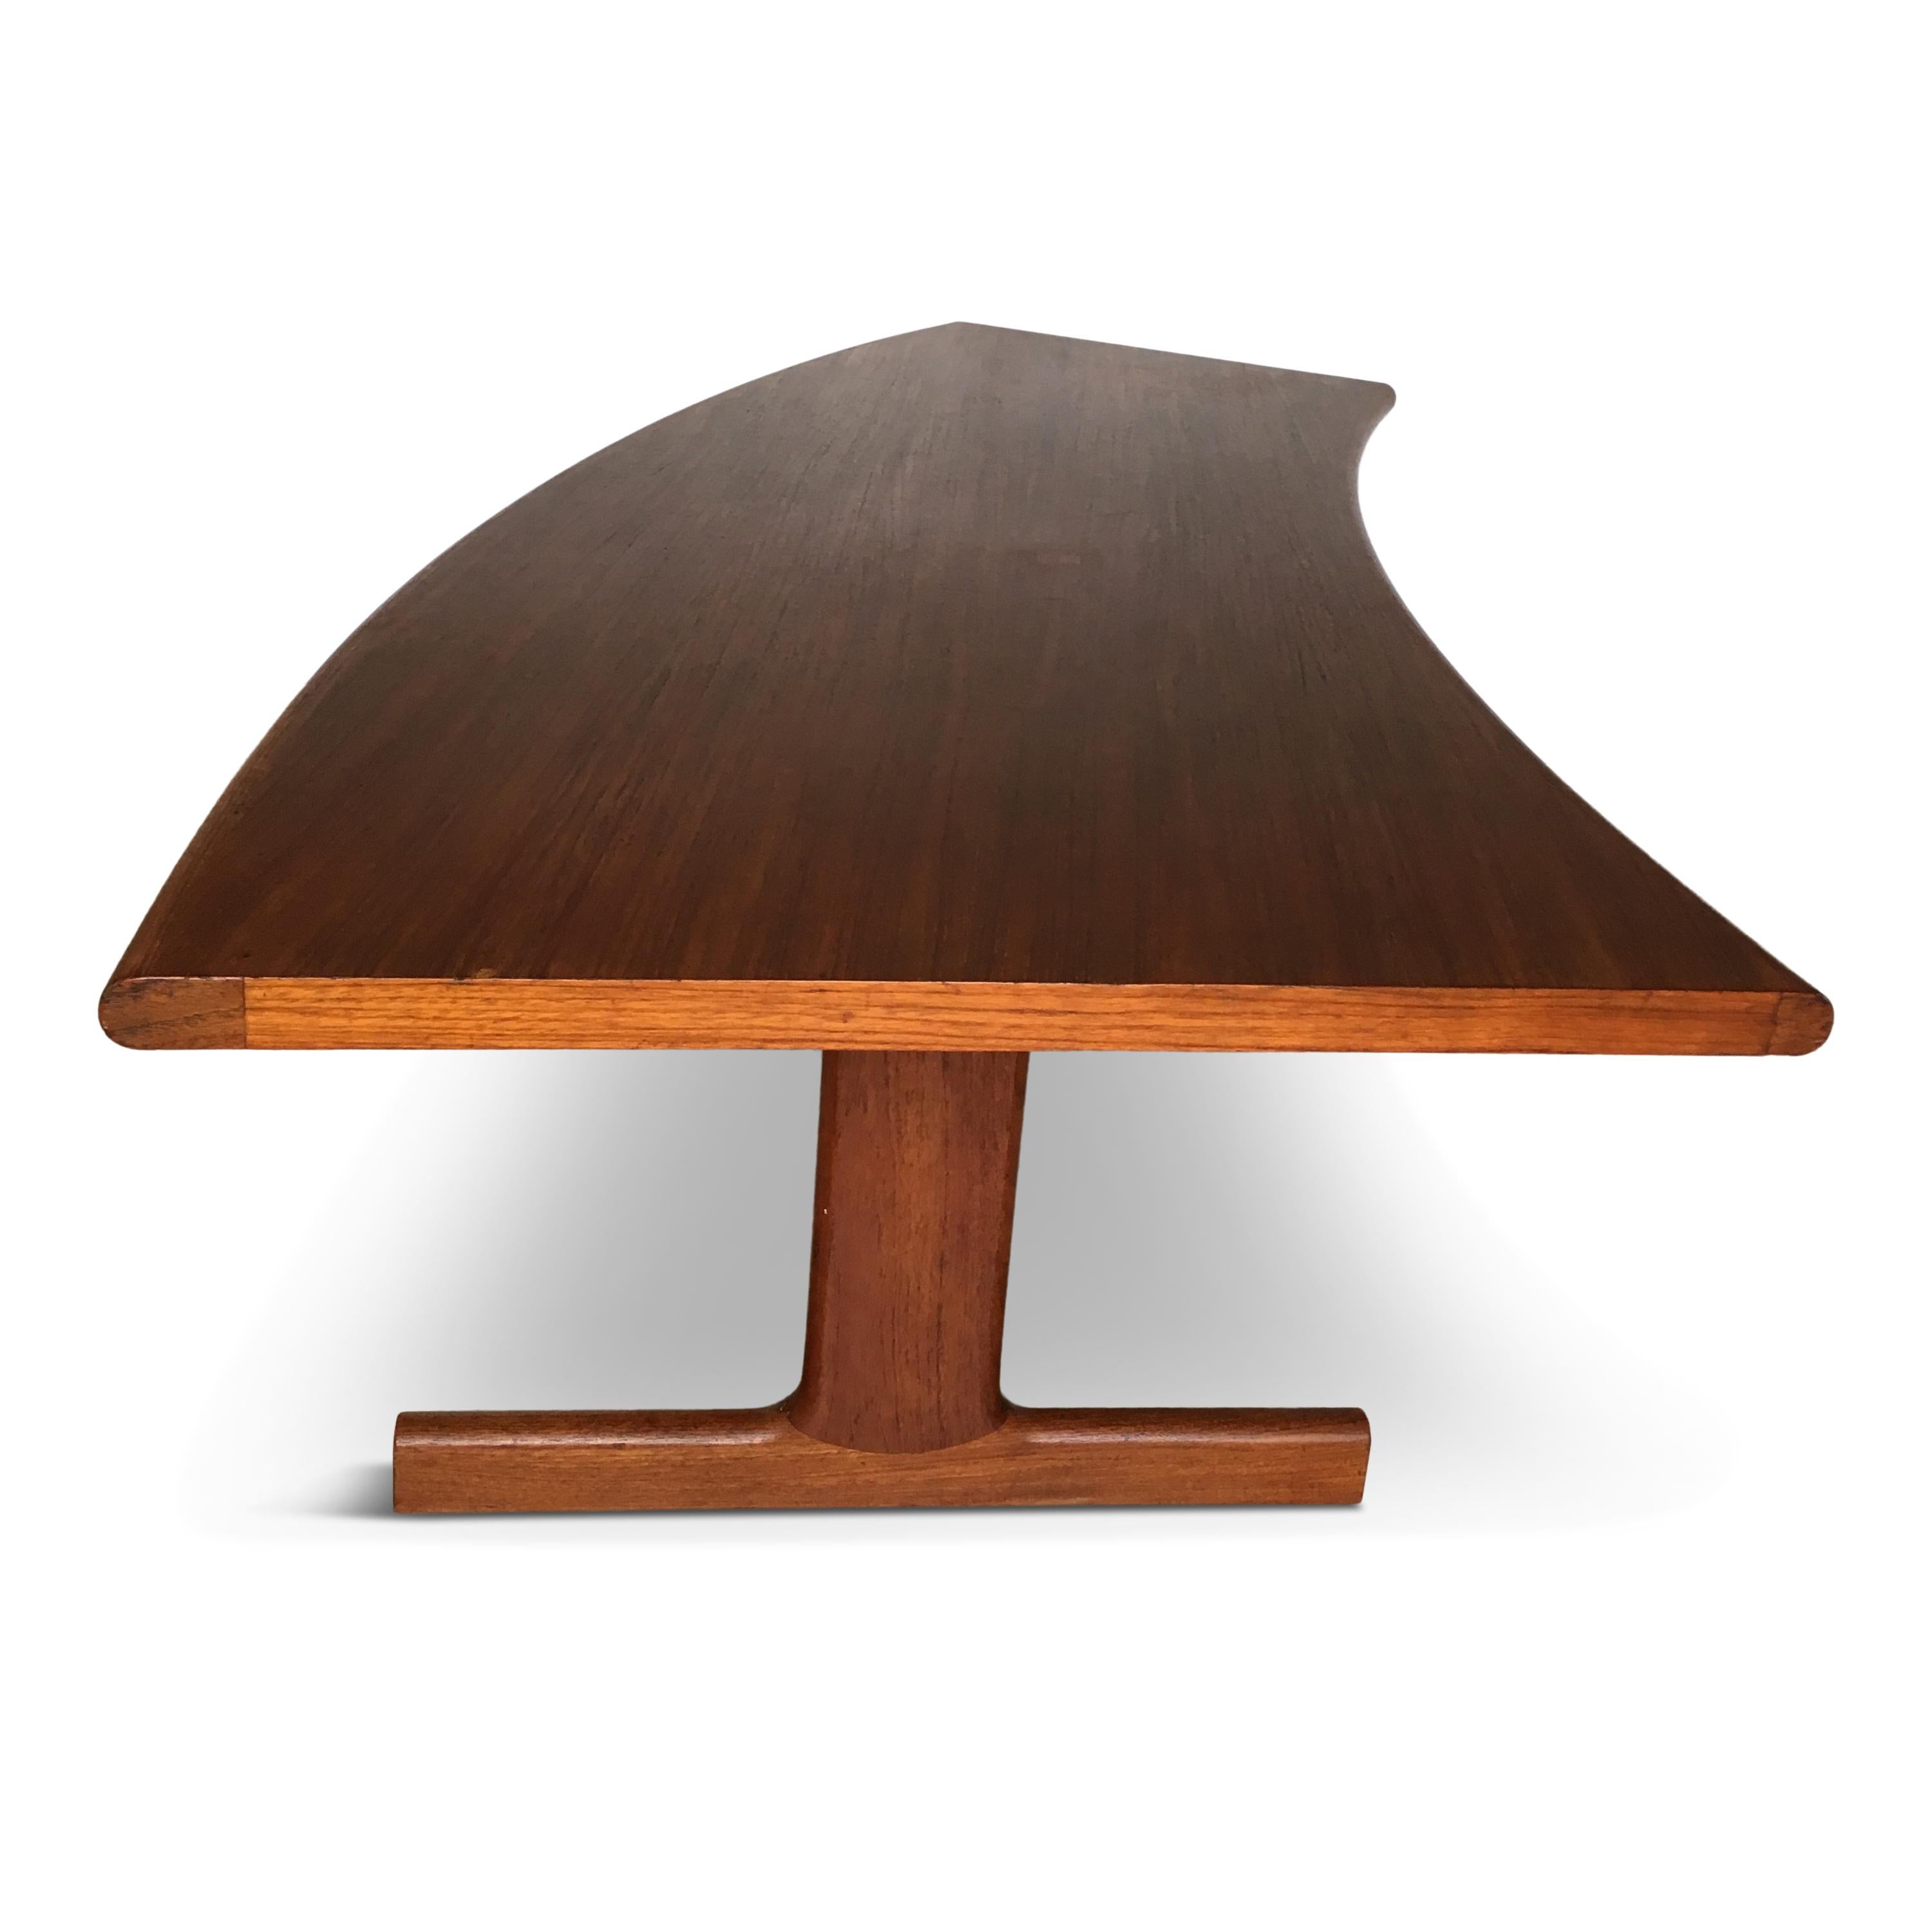 Mid-20th Century Midcentury Danish Teak Coffee Table with Curved Desk, 1950s For Sale